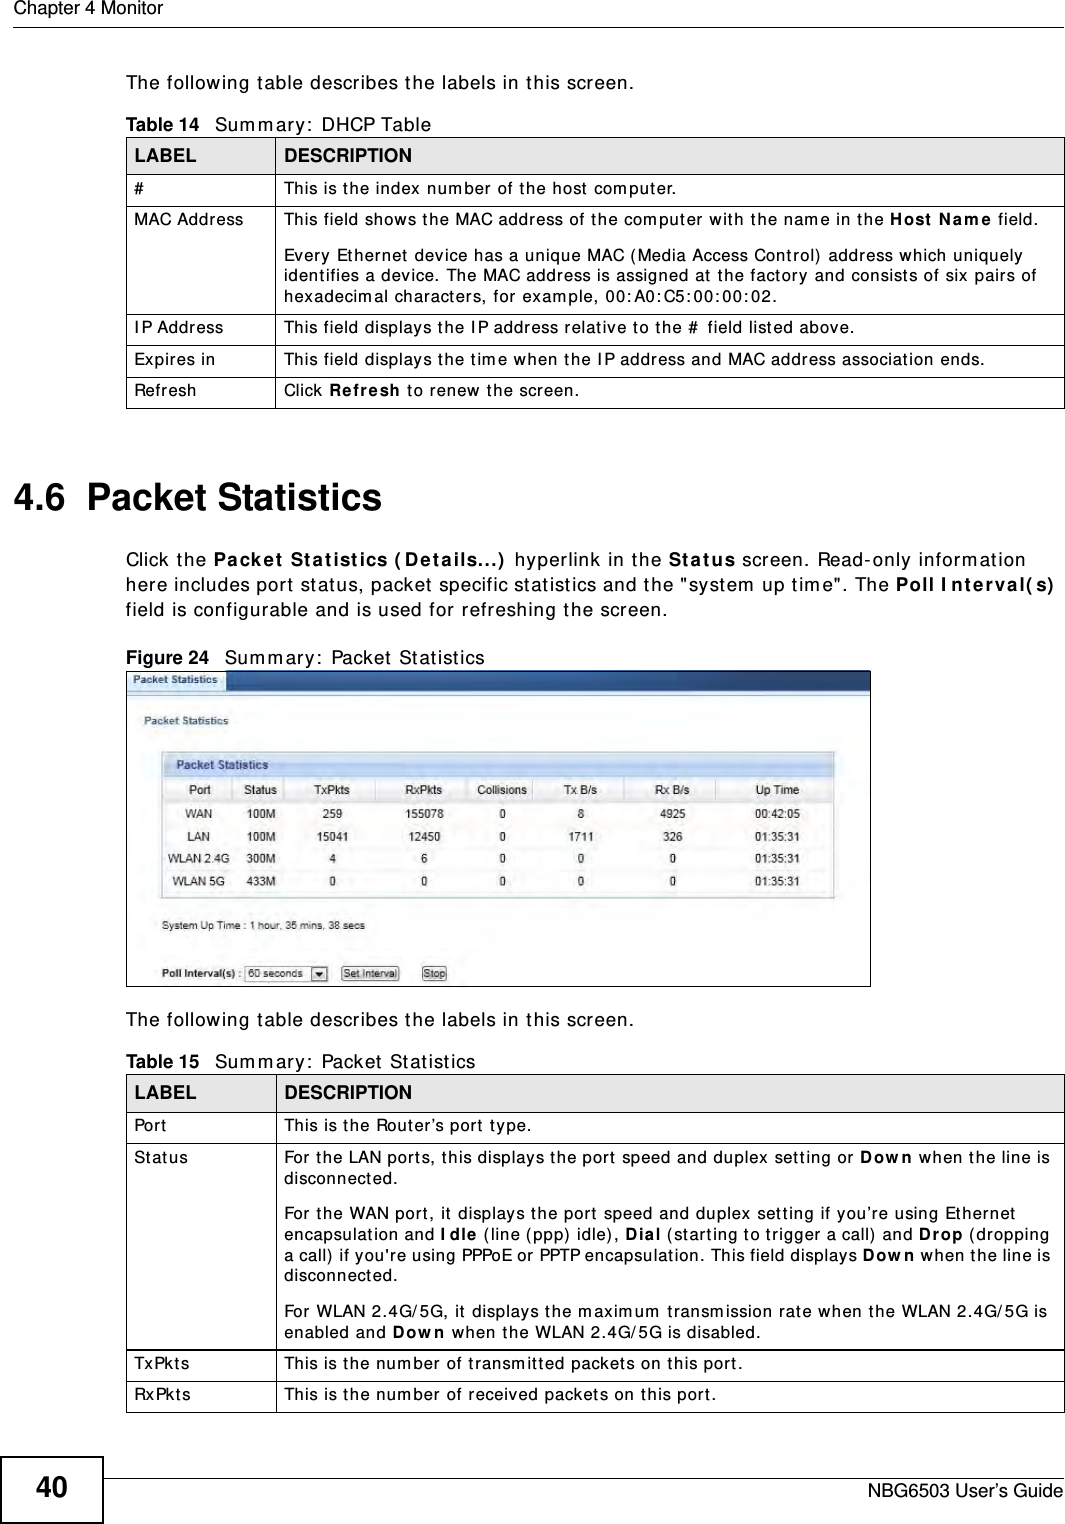 Chapter 4 MonitorNBG6503 User’s Guide40The following table describes the labels in this screen.4.6  Packet Statistics Click the Packet Statistics (Details...) hyperlink in the Status screen. Read-only information here includes port status, packet specific statistics and the &quot;system up time&quot;. The Poll Interval(s) field is configurable and is used for refreshing the screen.Figure 24   Summary: Packet Statistics The following table describes the labels in this screen.Table 14   Summary: DHCP TableLABEL  DESCRIPTION#  This is the index number of the host computer.MAC Address This field shows the MAC address of the computer with the name in the Host Name field.Every Ethernet device has a unique MAC (Media Access Control) address which uniquely identifies a device. The MAC address is assigned at the factory and consists of six pairs of hexadecimal characters, for example, 00:A0:C5:00:00:02.IP Address This field displays the IP address relative to the # field listed above.Expires in This field displays the time when the IP address and MAC address association ends.Refresh Click Refresh to renew the screen. Table 15   Summary: Packet StatisticsLABEL DESCRIPTIONPort This is the Router’s port type.Status  For the LAN ports, this displays the port speed and duplex setting or Down when the line is disconnected.For the WAN port, it displays the port speed and duplex setting if you’re using Ethernet encapsulation and Idle (line (ppp) idle), Dial (starting to trigger a call) and Drop (dropping a call) if you&apos;re using PPPoE or PPTP encapsulation. This field displays Down when the line is disconnected.For WLAN 2.4G/5G, it displays the maximum transmission rate when the WLAN 2.4G/5G is enabled and Down when the WLAN 2.4G/5G is disabled.TxPkts  This is the number of transmitted packets on this port.RxPkts  This is the number of received packets on this port.